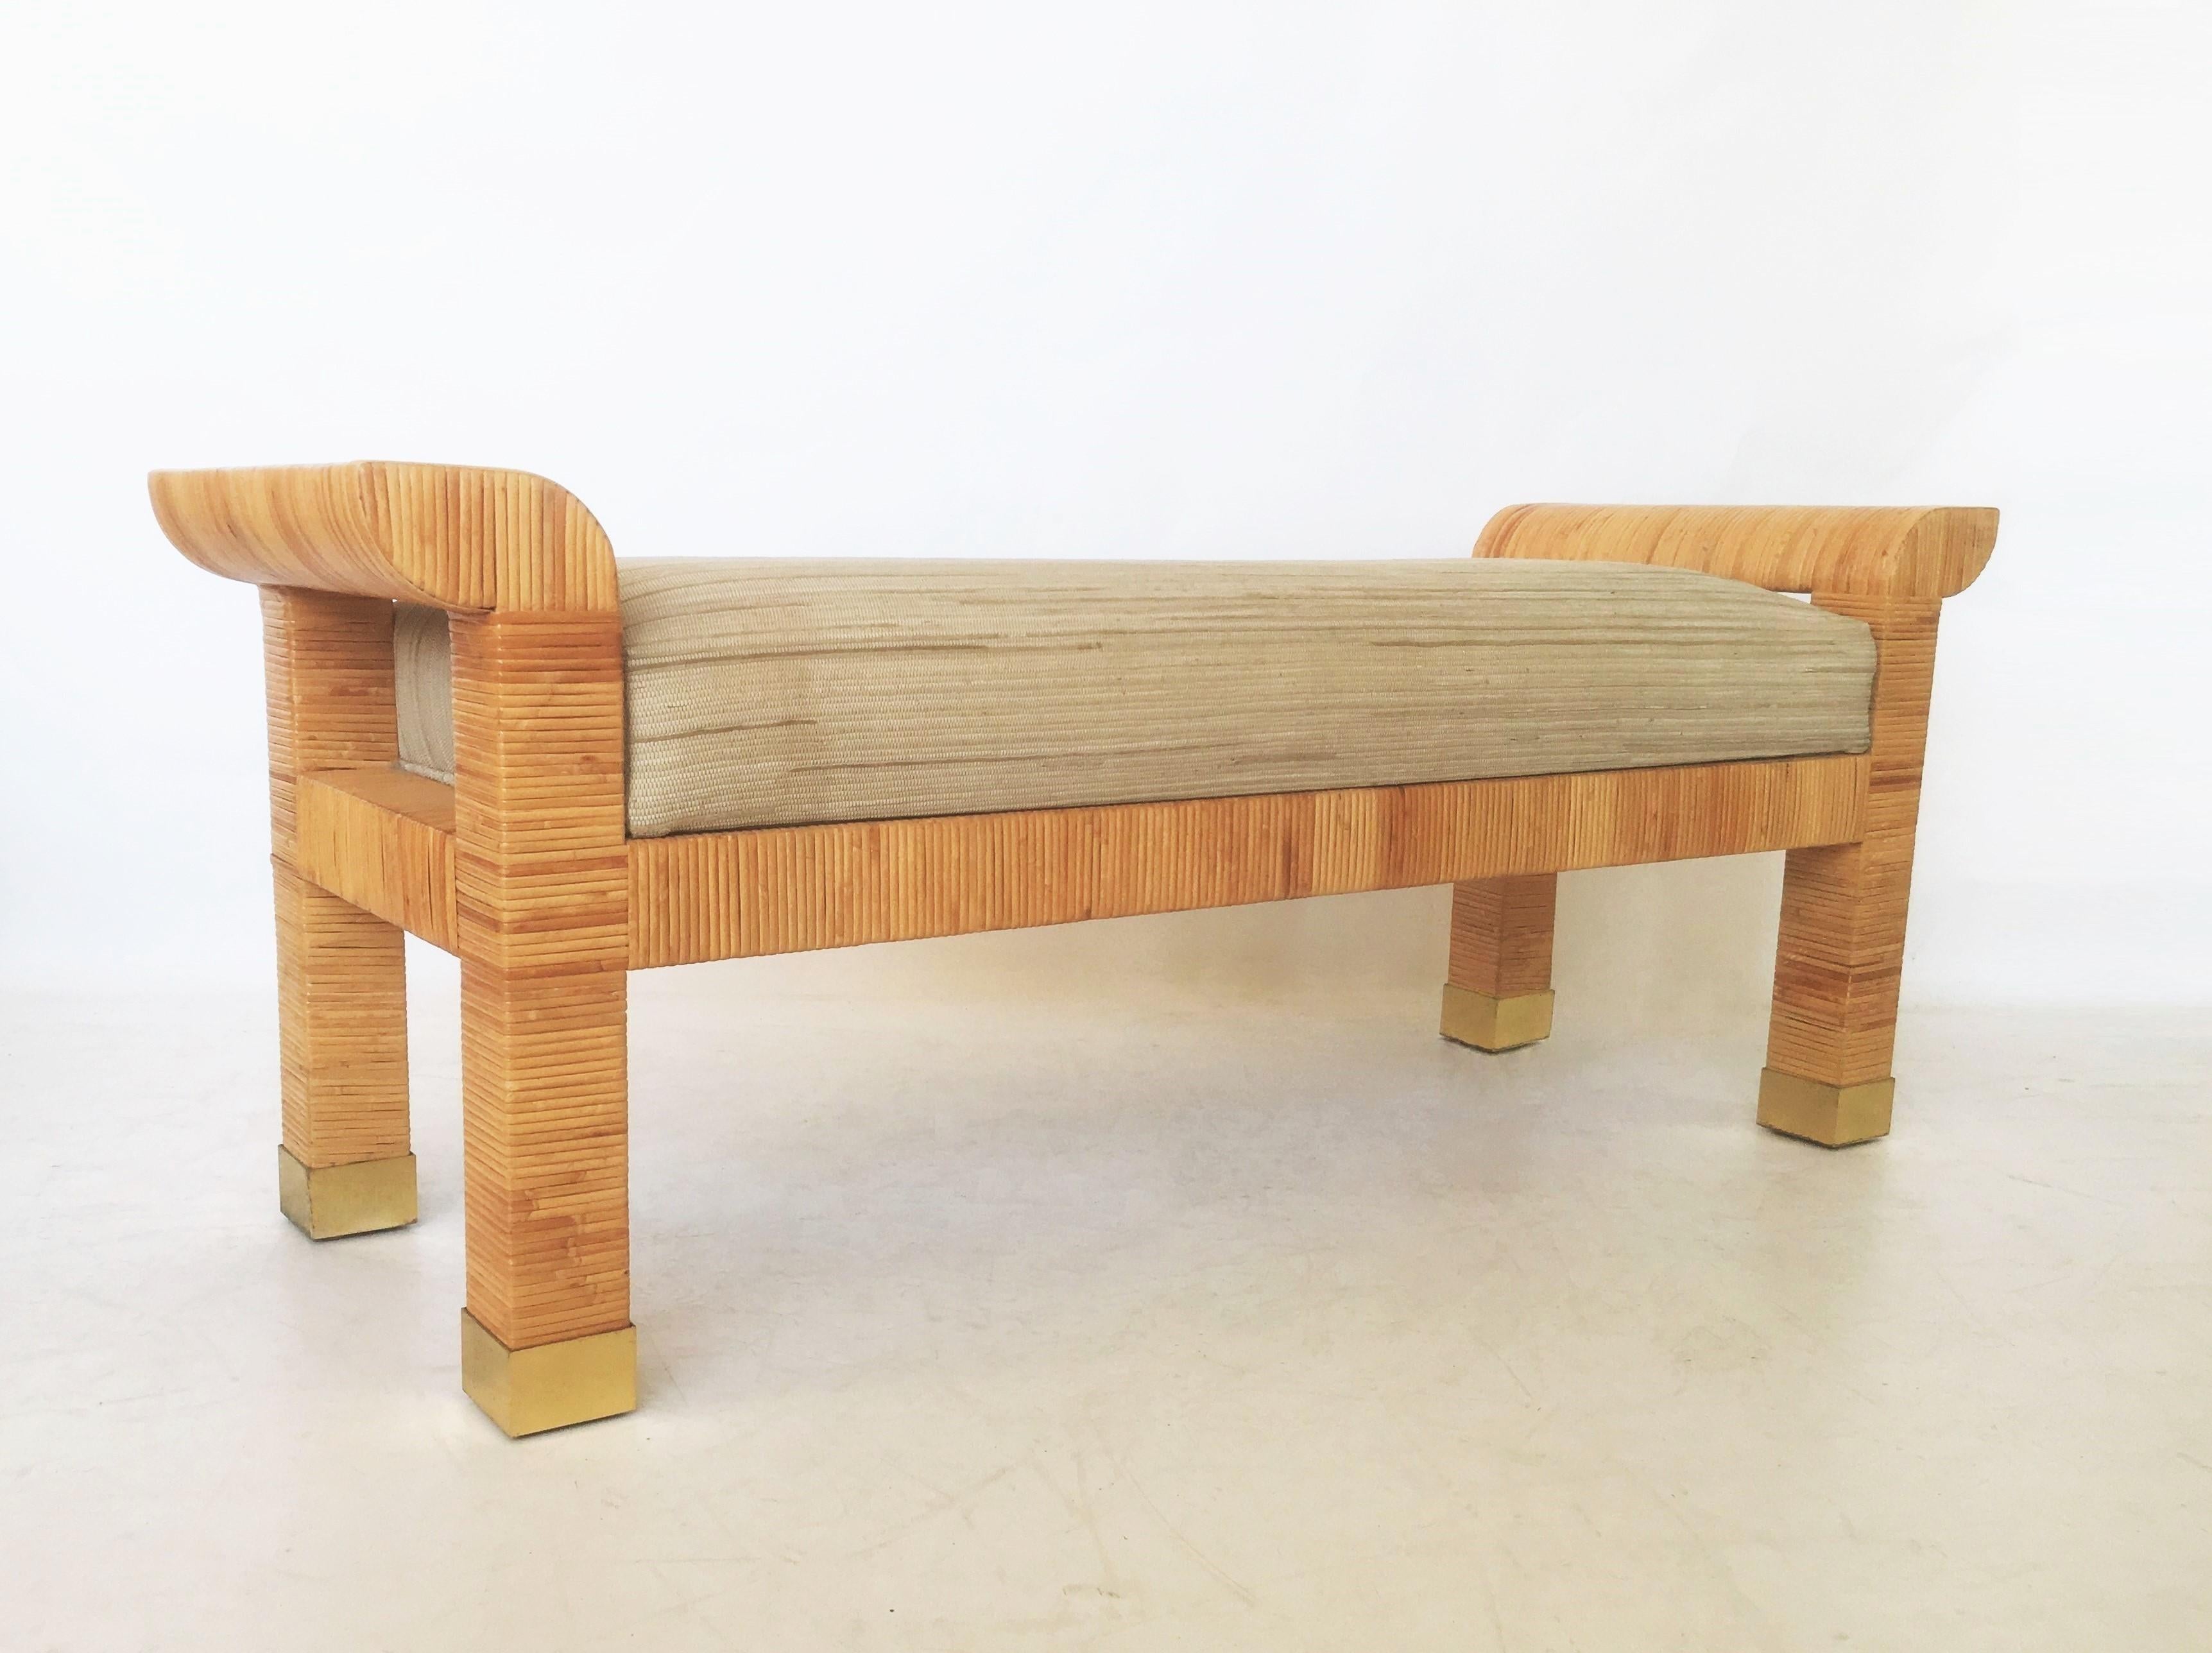 Exceptional style and quality. This stunning bench designed by Billy Baldwin for Bielecky Brothers, circa 1985. Expertly crafted hardwood form painstakingly hand-wrapped in cane, upholstered seat, legs ending in with brass sabots. All cane wrapping